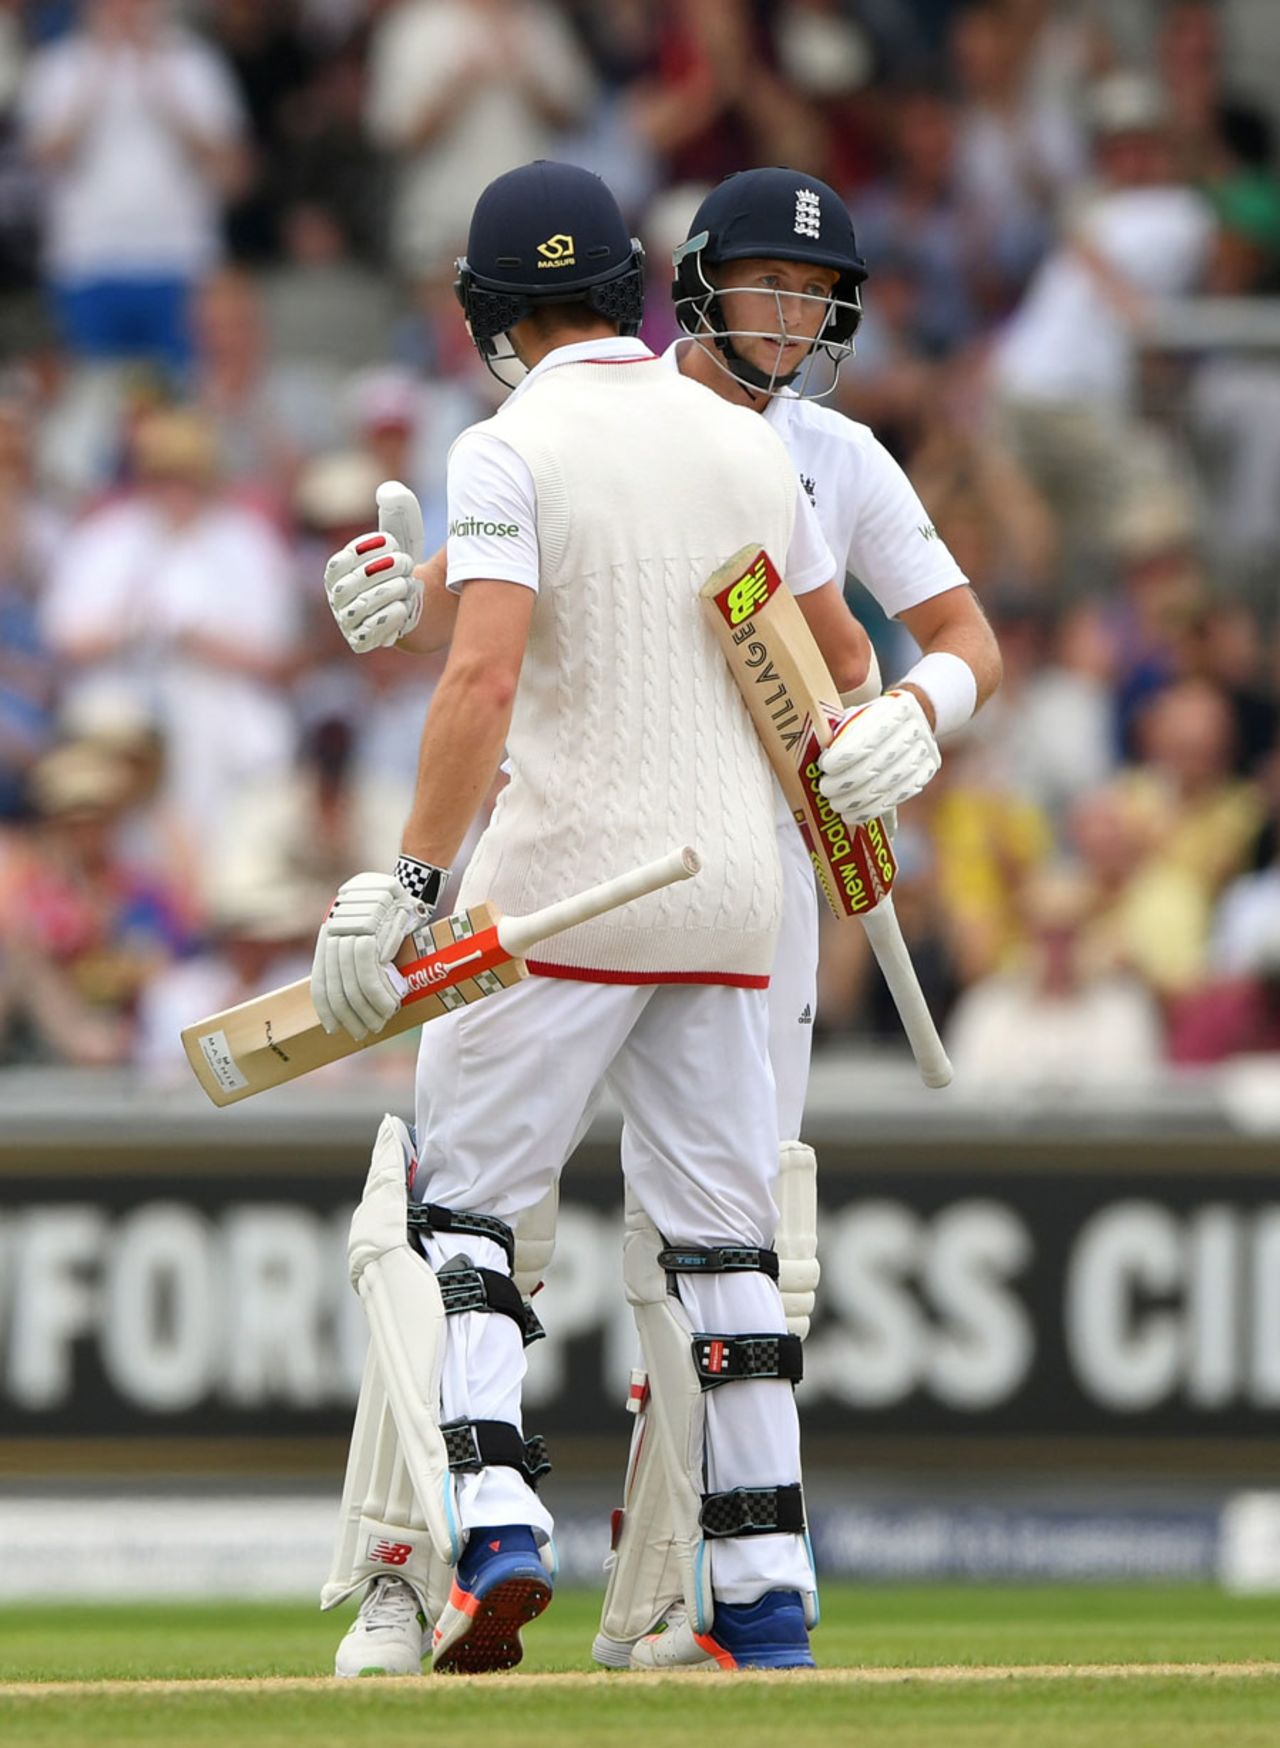 Chris Woakes congratulates Joe Root on reaching 150 , England v Pakistan, 2nd Investec Test, Old Trafford, 2nd day, July 23, 2016